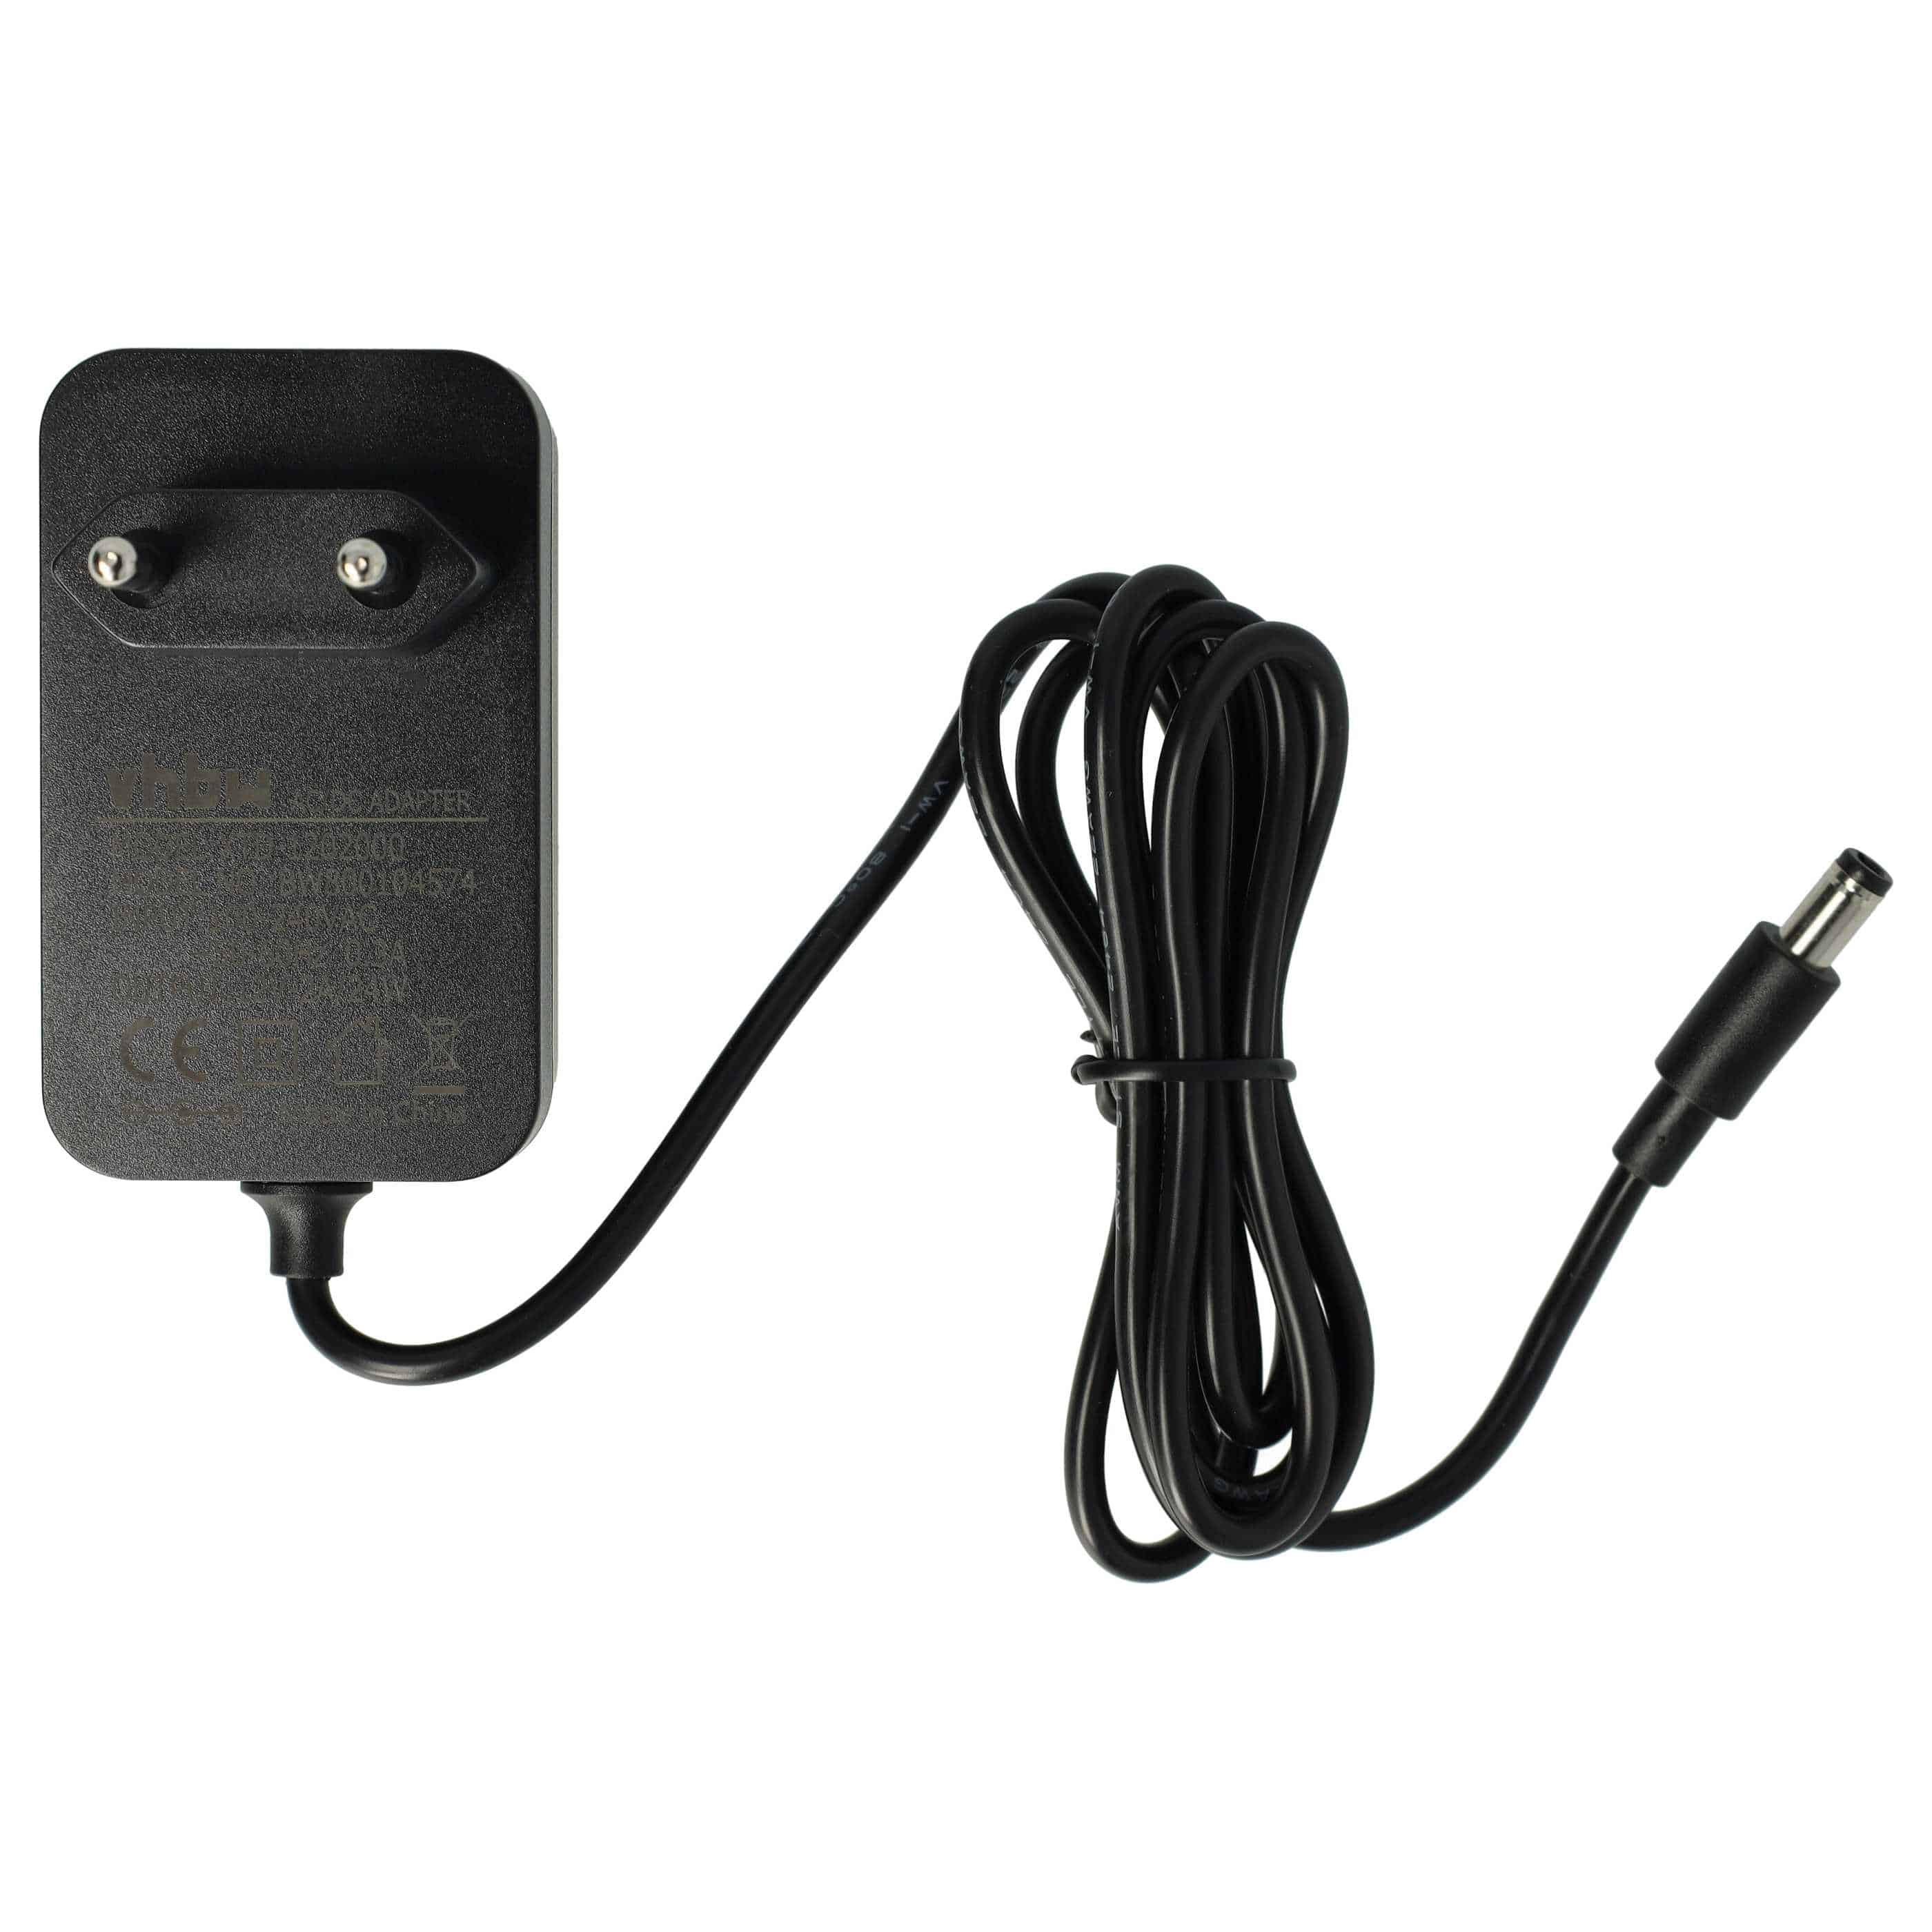 Mains Power Adapter replaces AVM 311POW165, 311POW134 for AVM router etc. - 140 cm